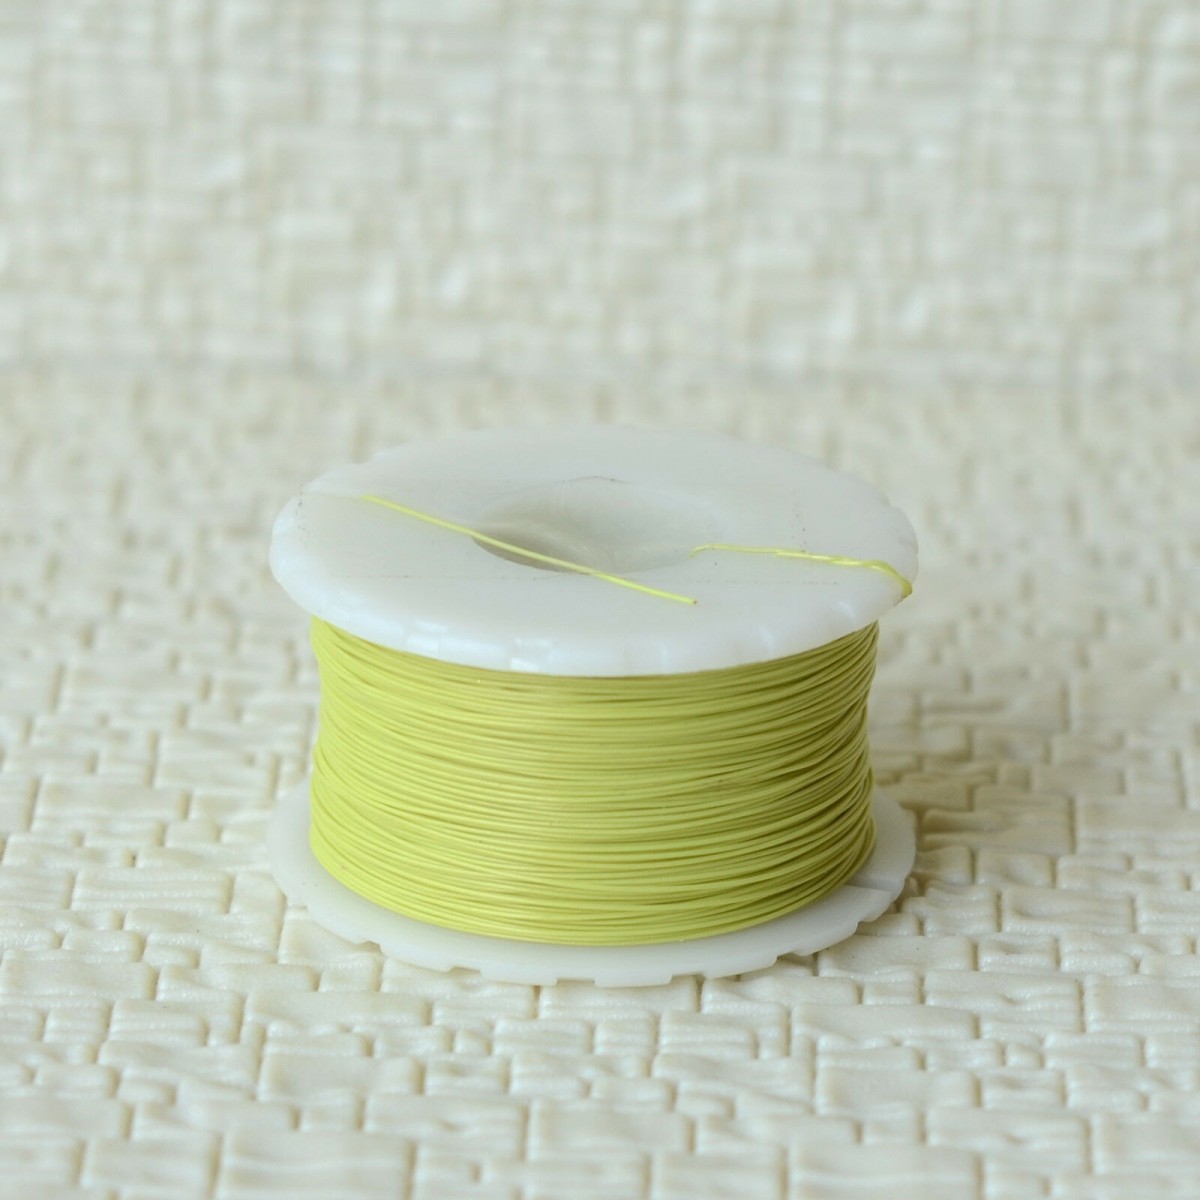 100 meters 7/0.05 ultra slim Dia. 0.28mm 0.011" super thin cable Wire Yellow